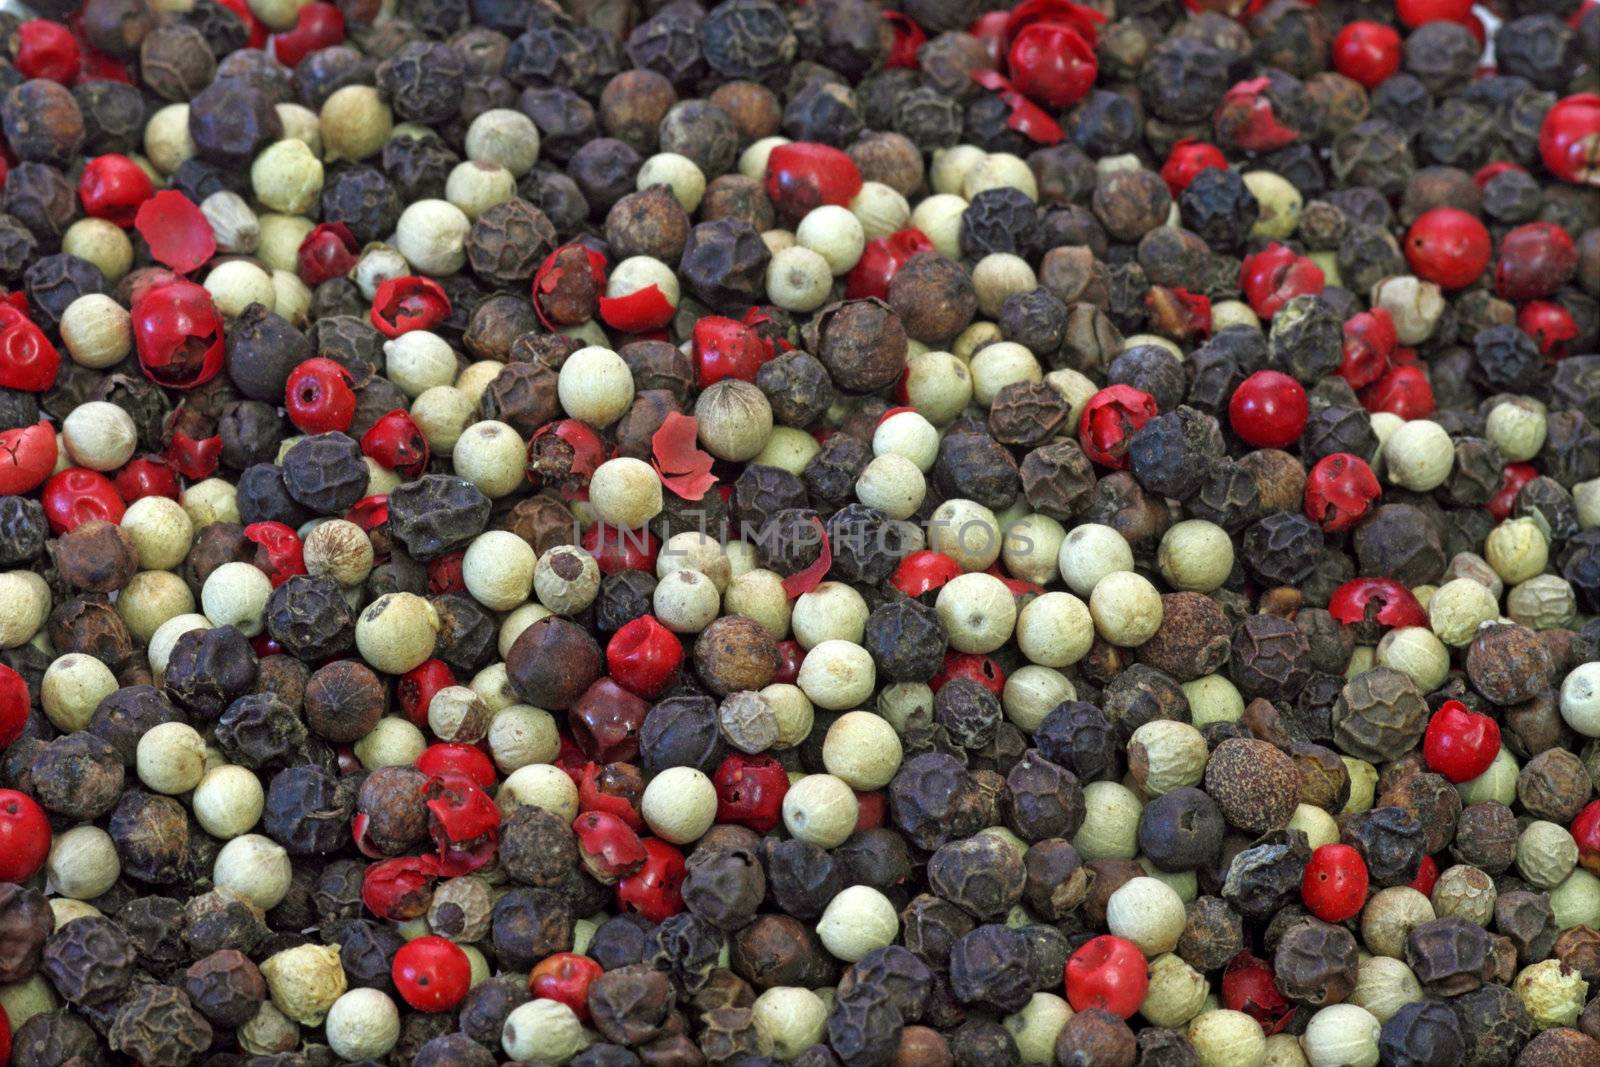 Pile of mixed pepper in detail. Shot in studio.